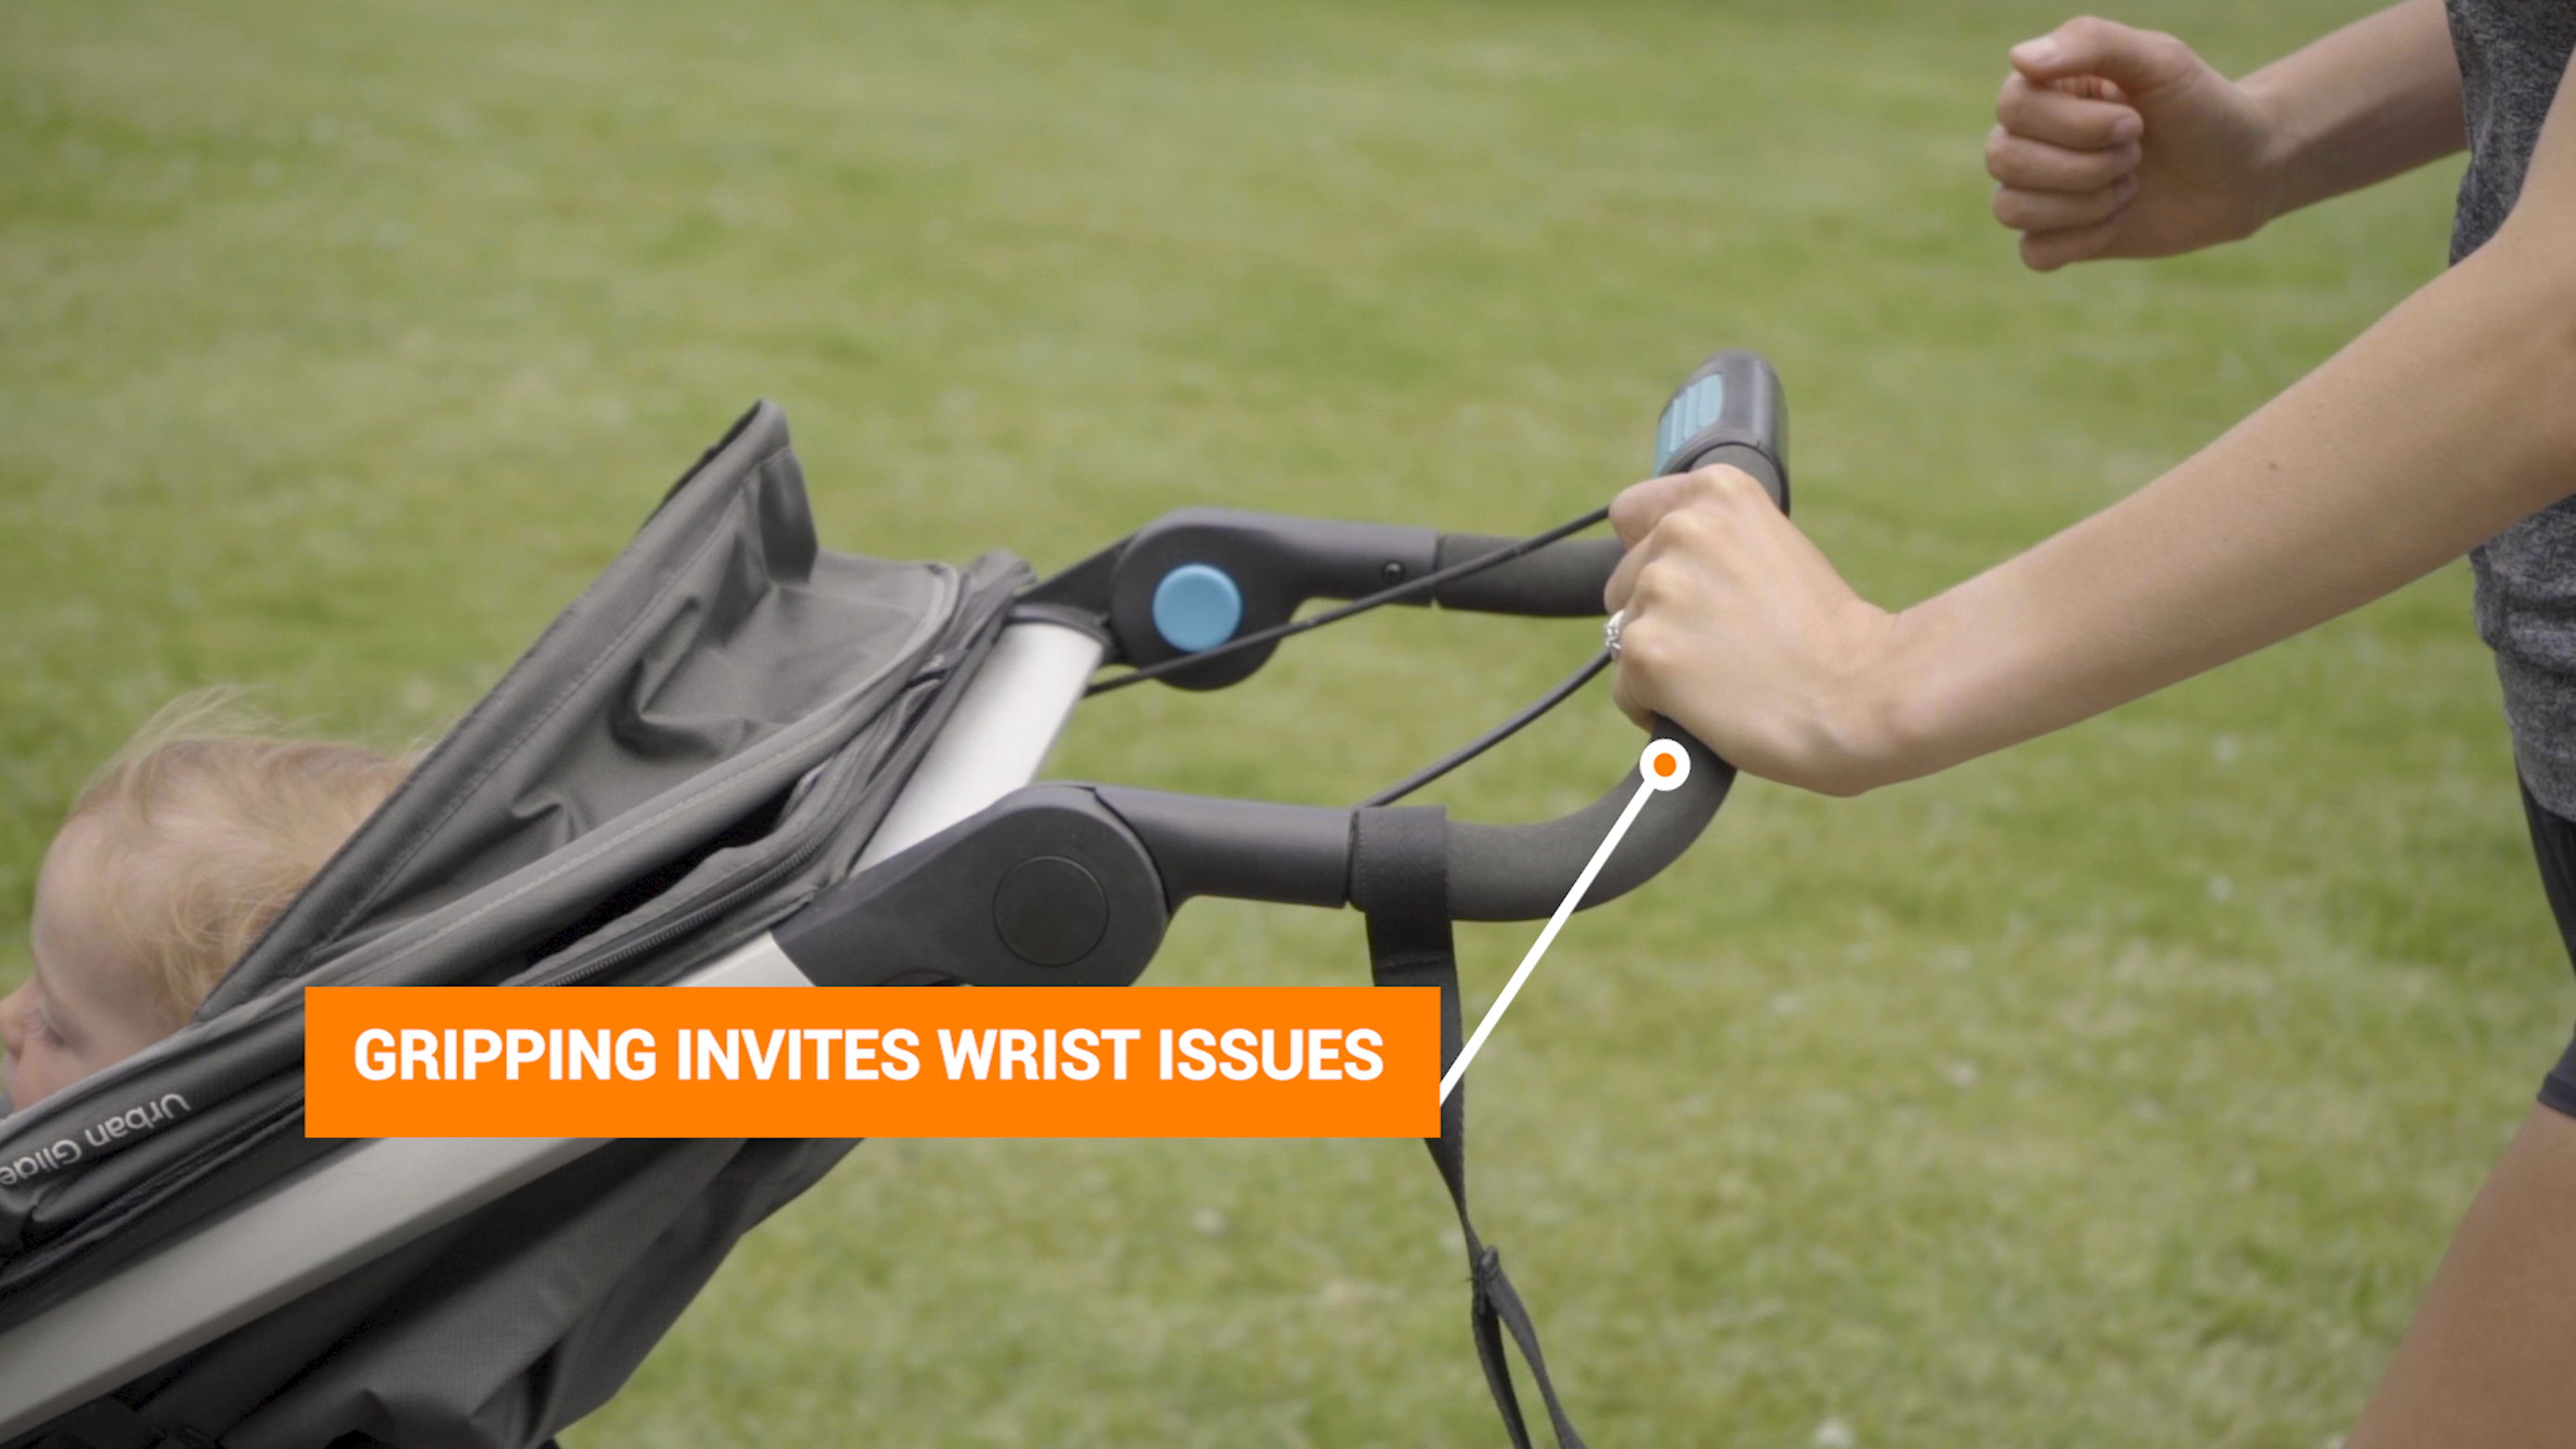 Gripping push strollers invites wrist issues